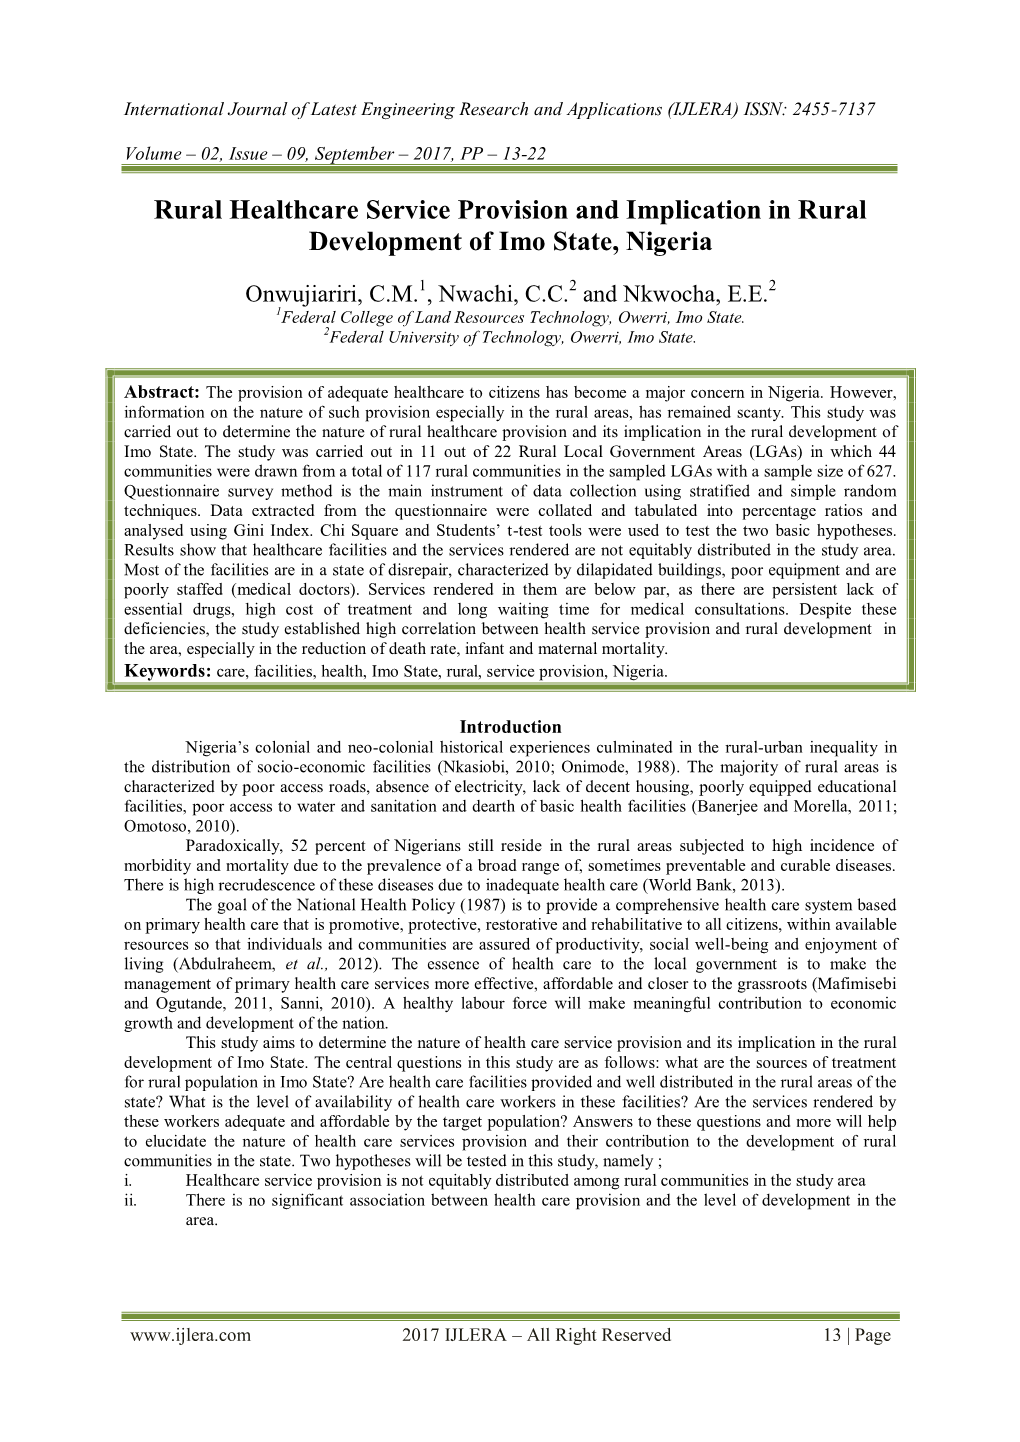 Rural Healthcare Service Provision and Implication in Rural Development of Imo State, Nigeria